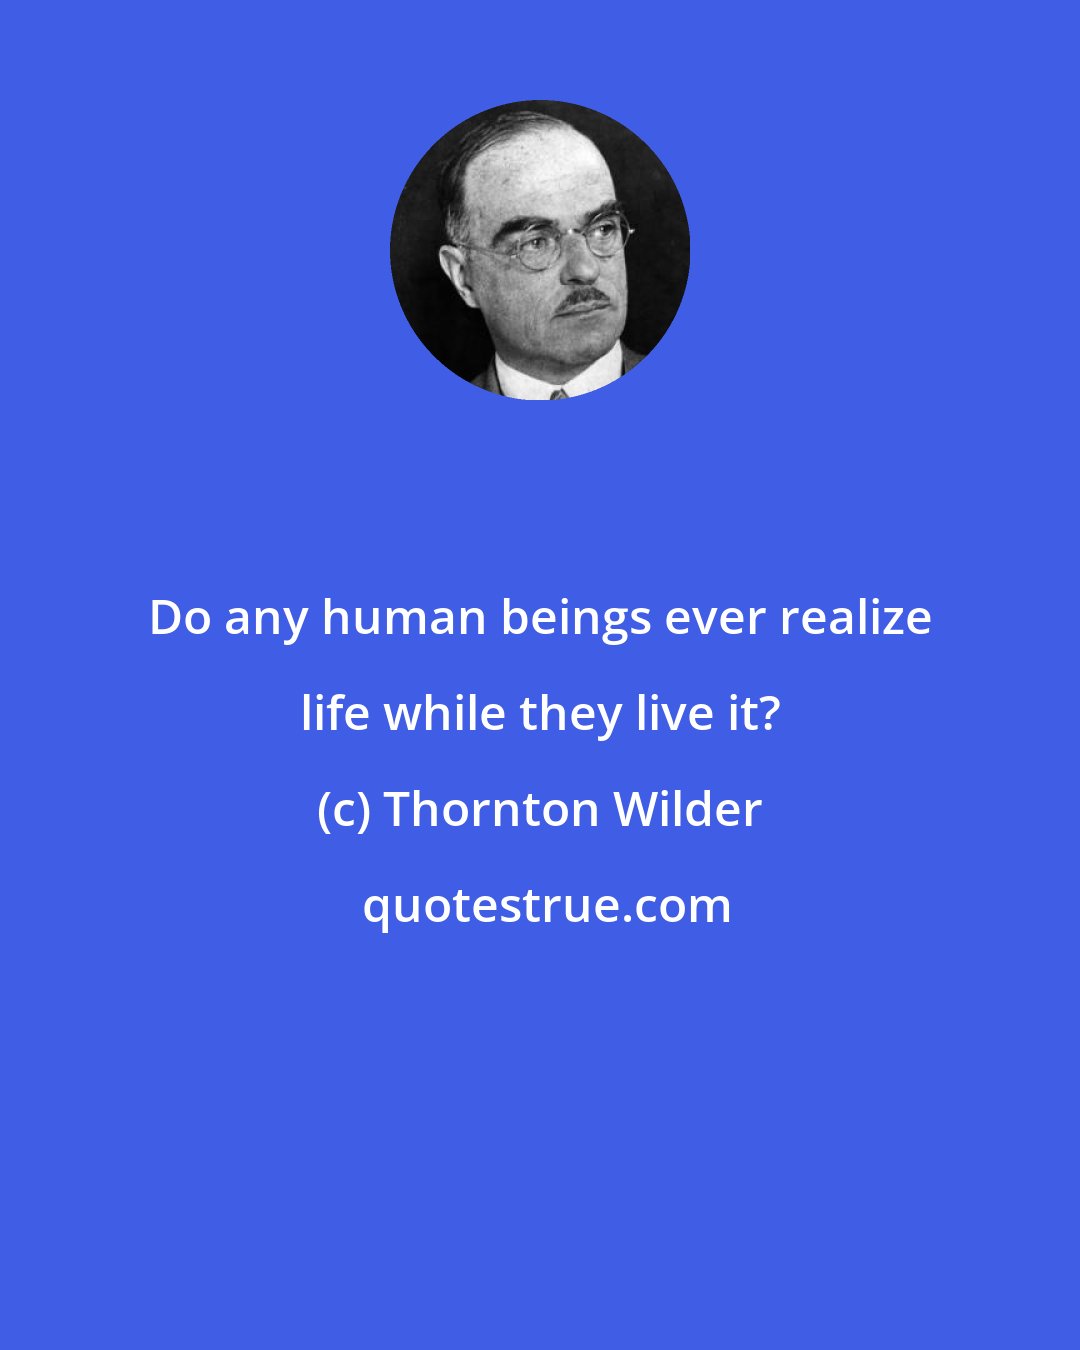 Thornton Wilder: Do any human beings ever realize life while they live it?